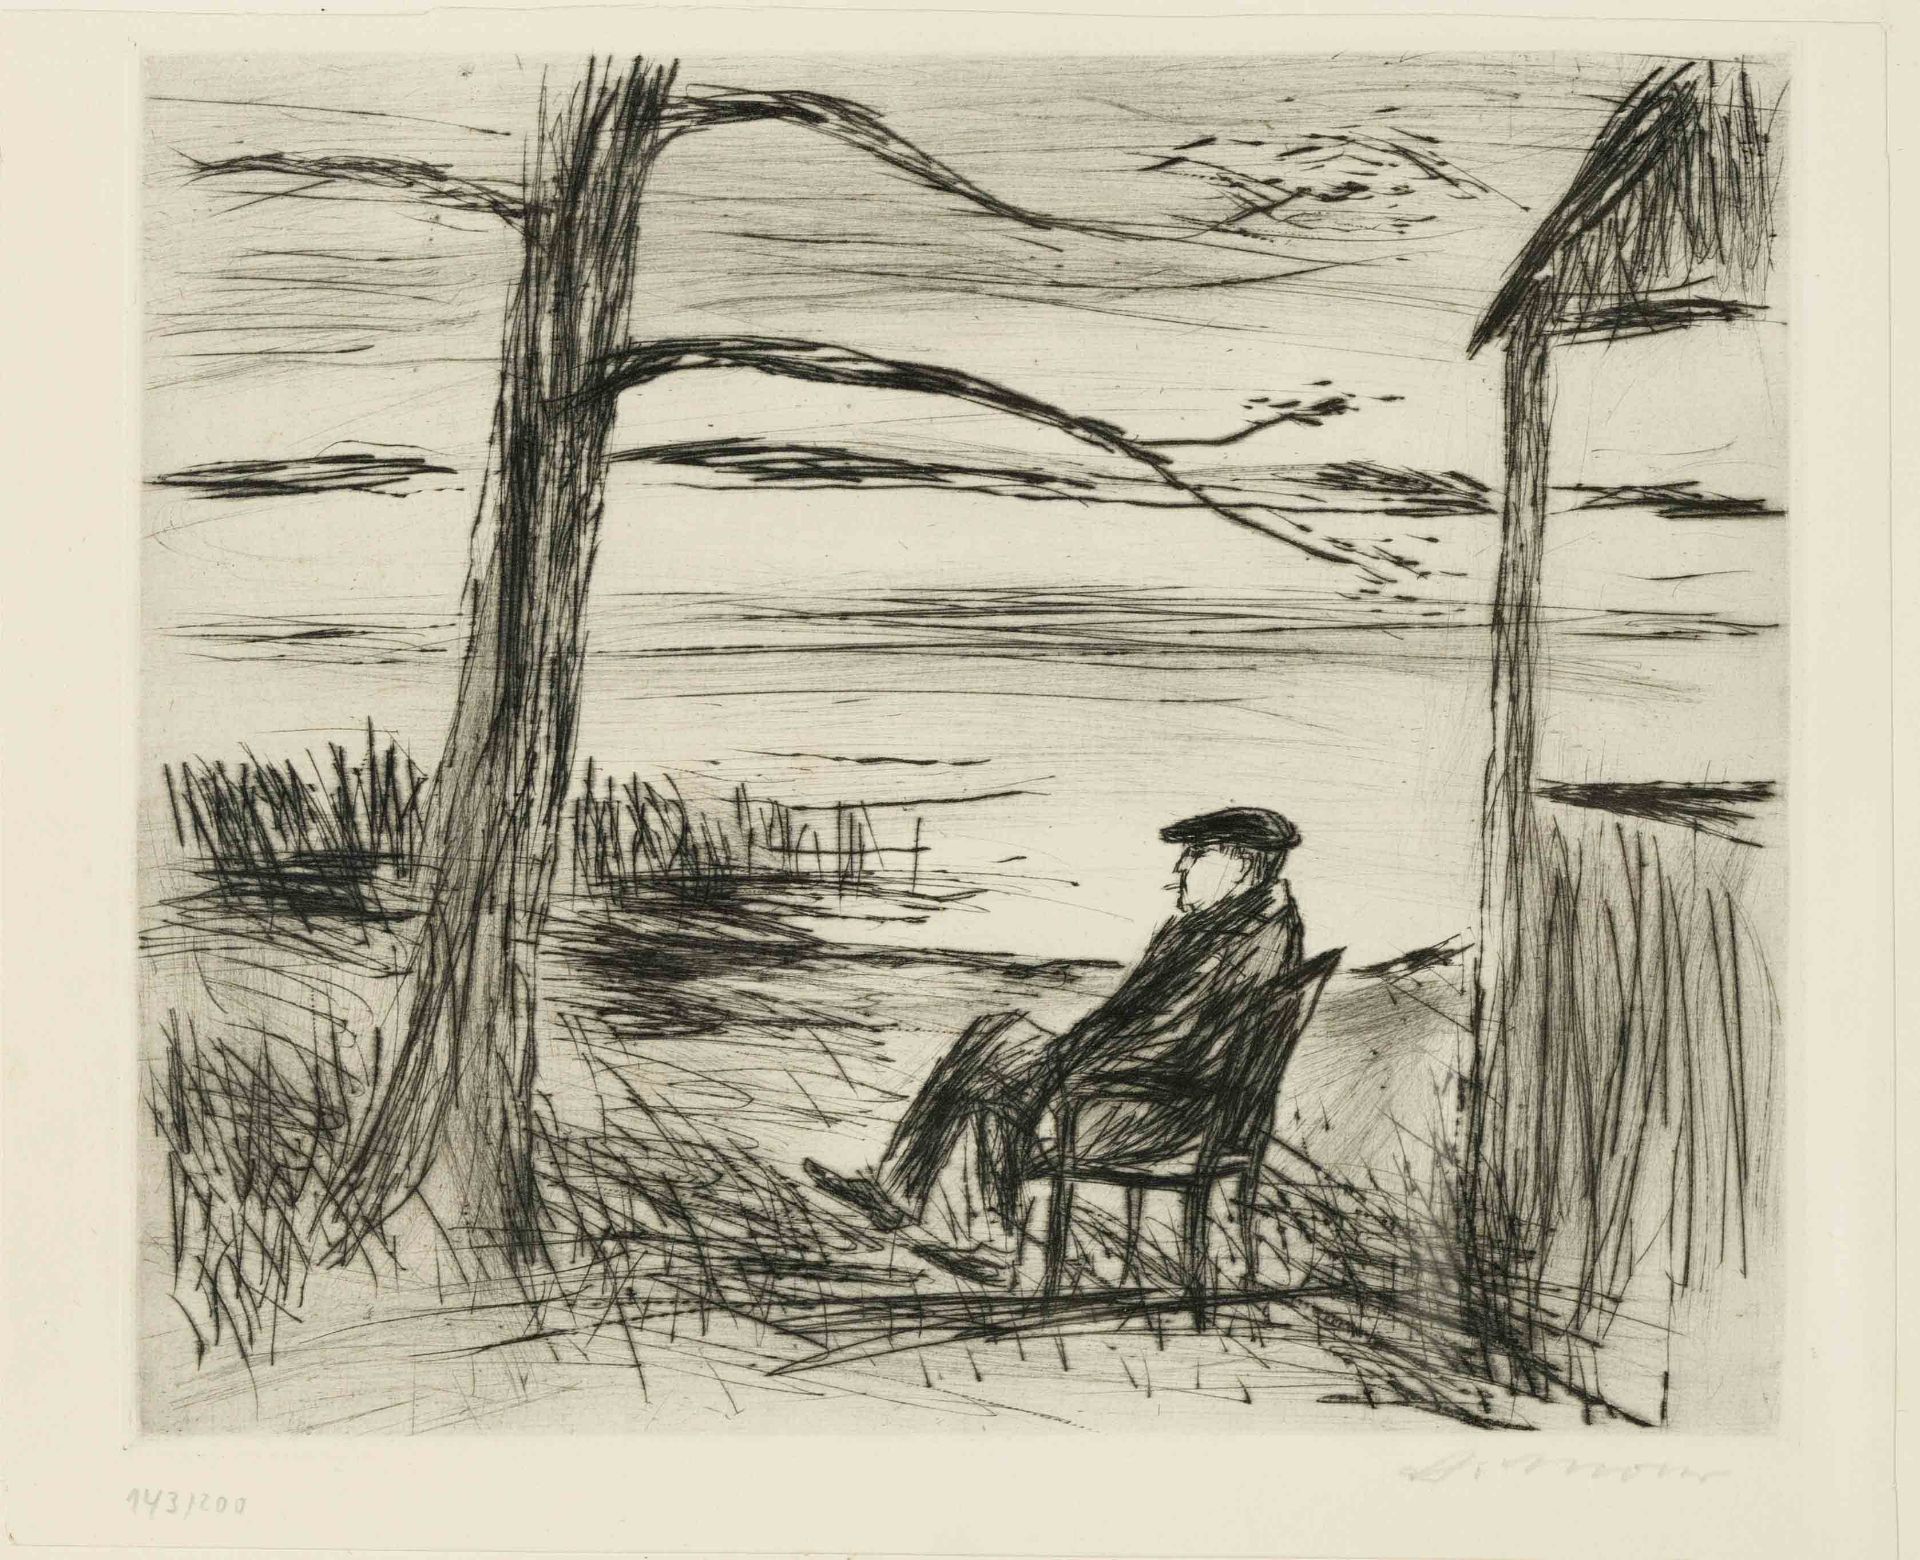 Arno Mohr (1910-2001), Man with cigarette sitting on a chair, drypoint, signed lower right, numbered